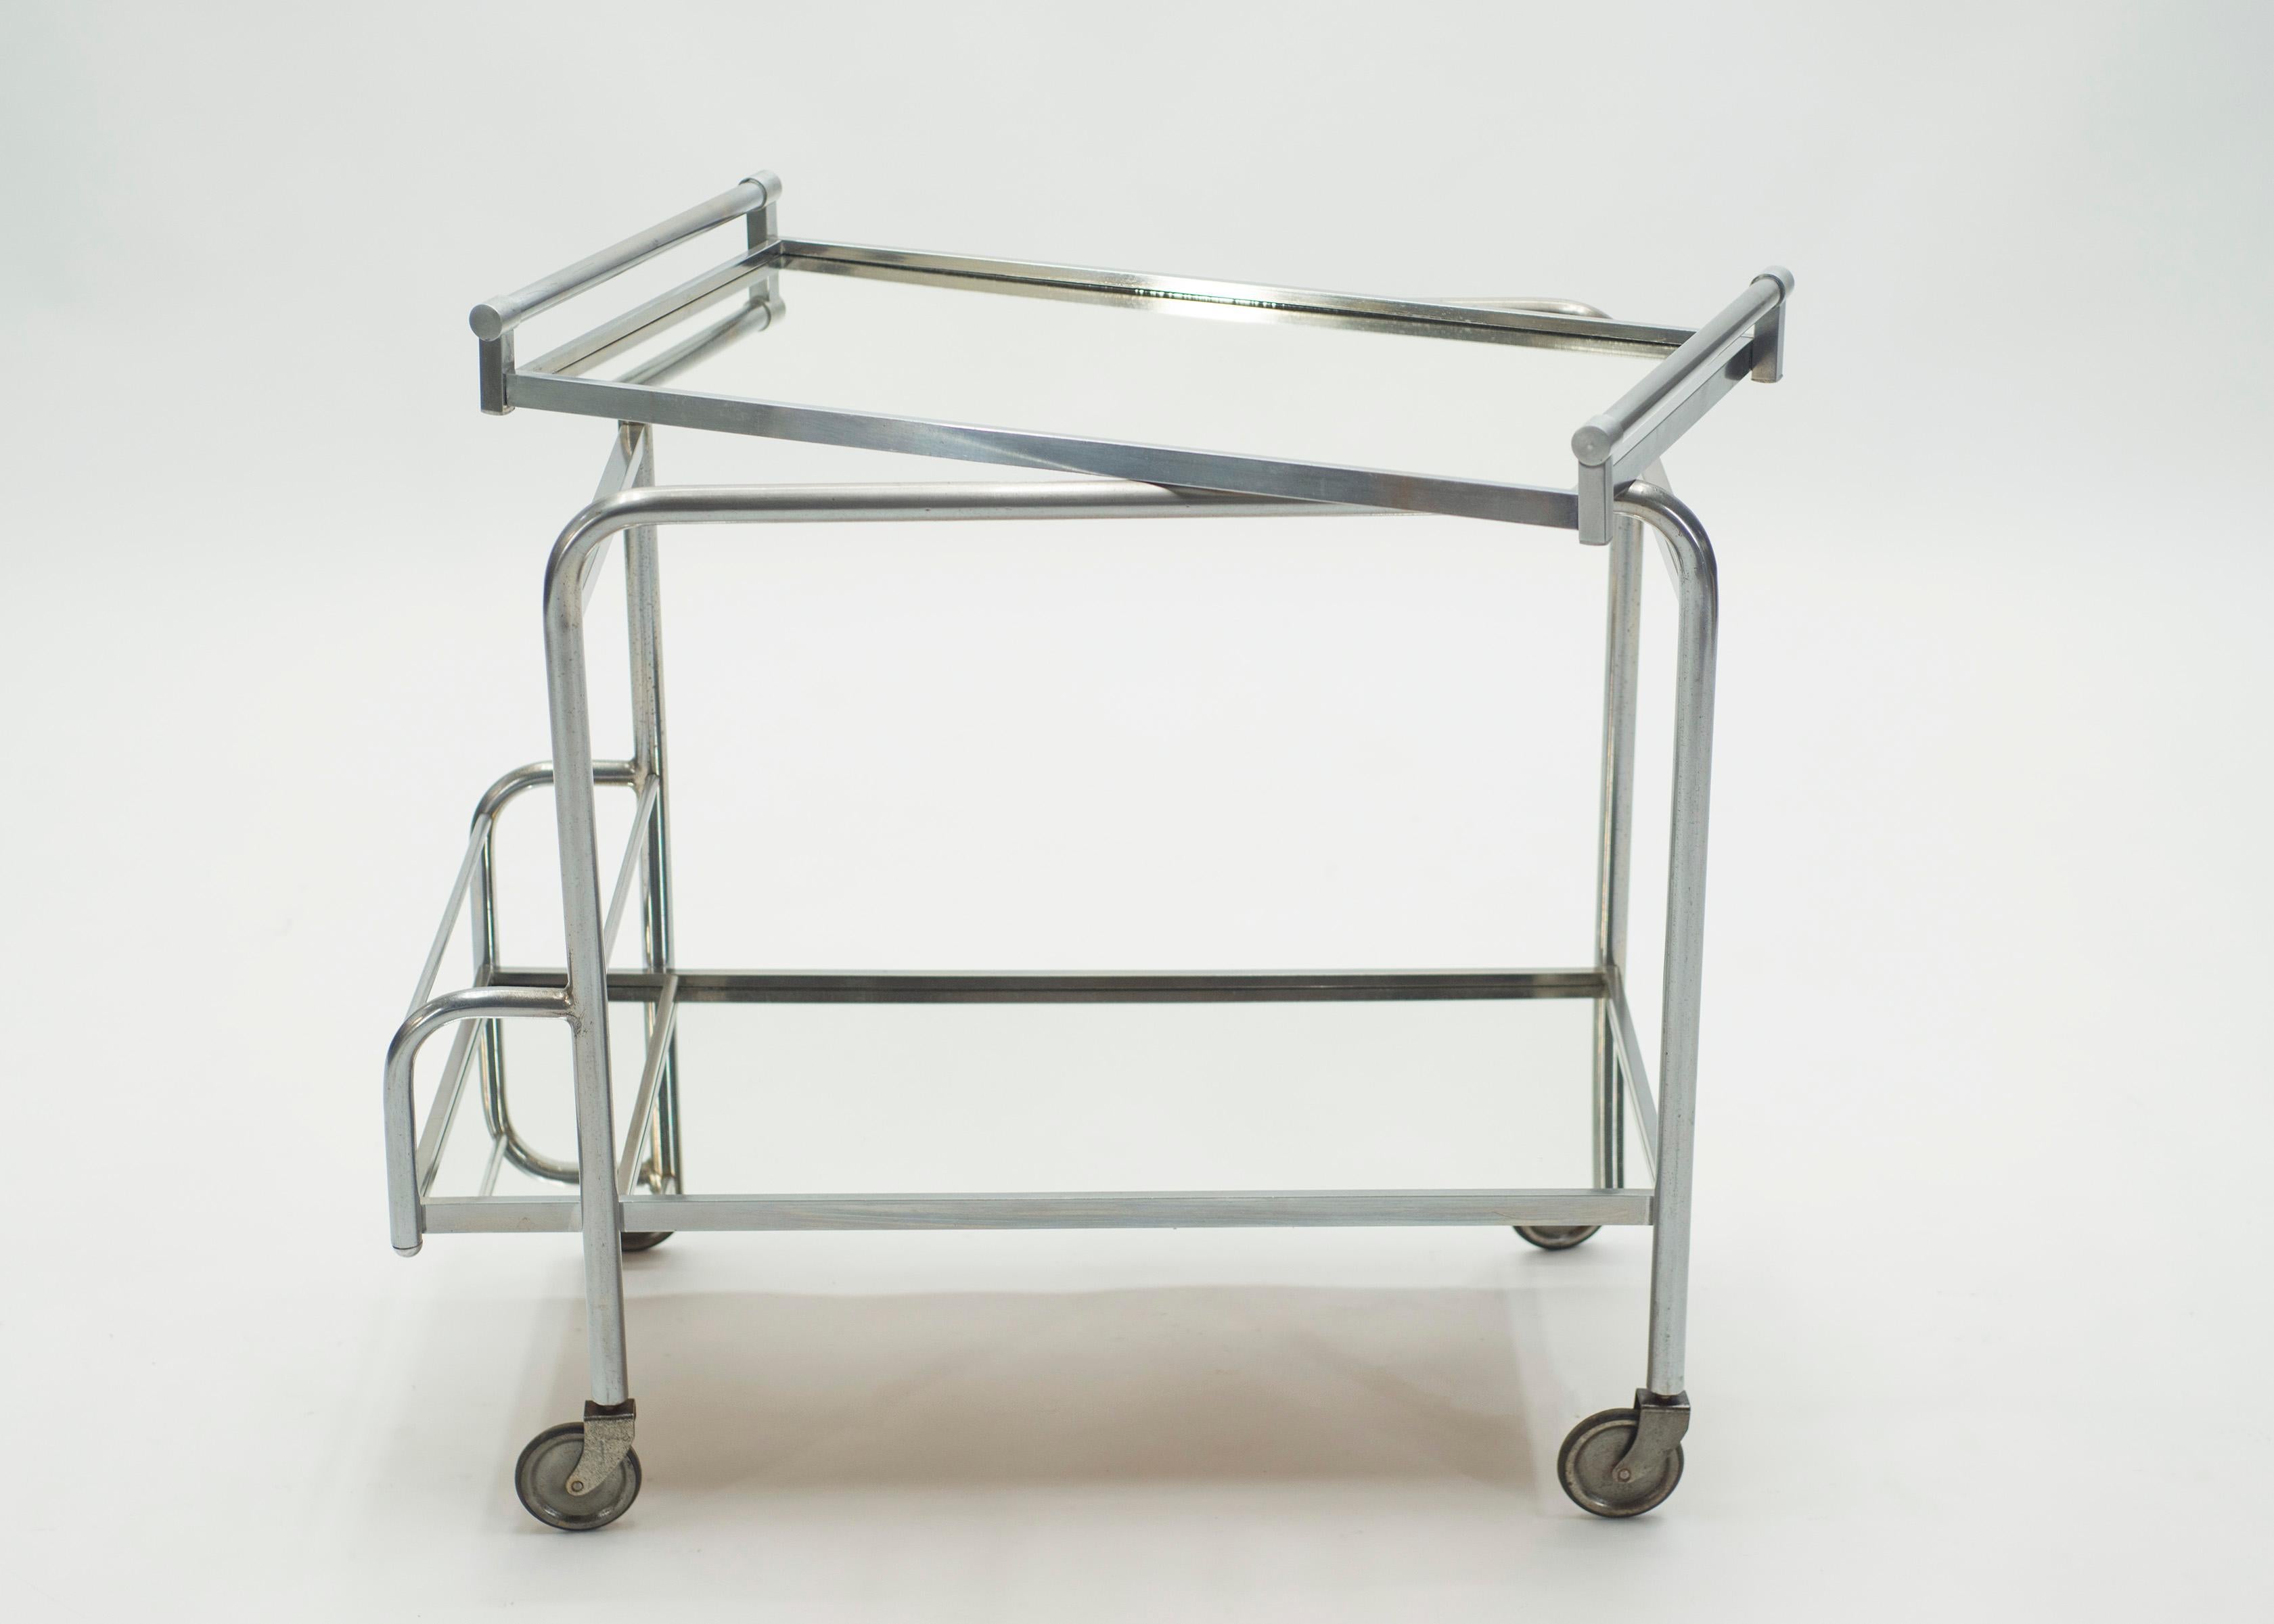 French Jacques Adnet Art Deco Mirrored Bar Cart Trolley, 1930s